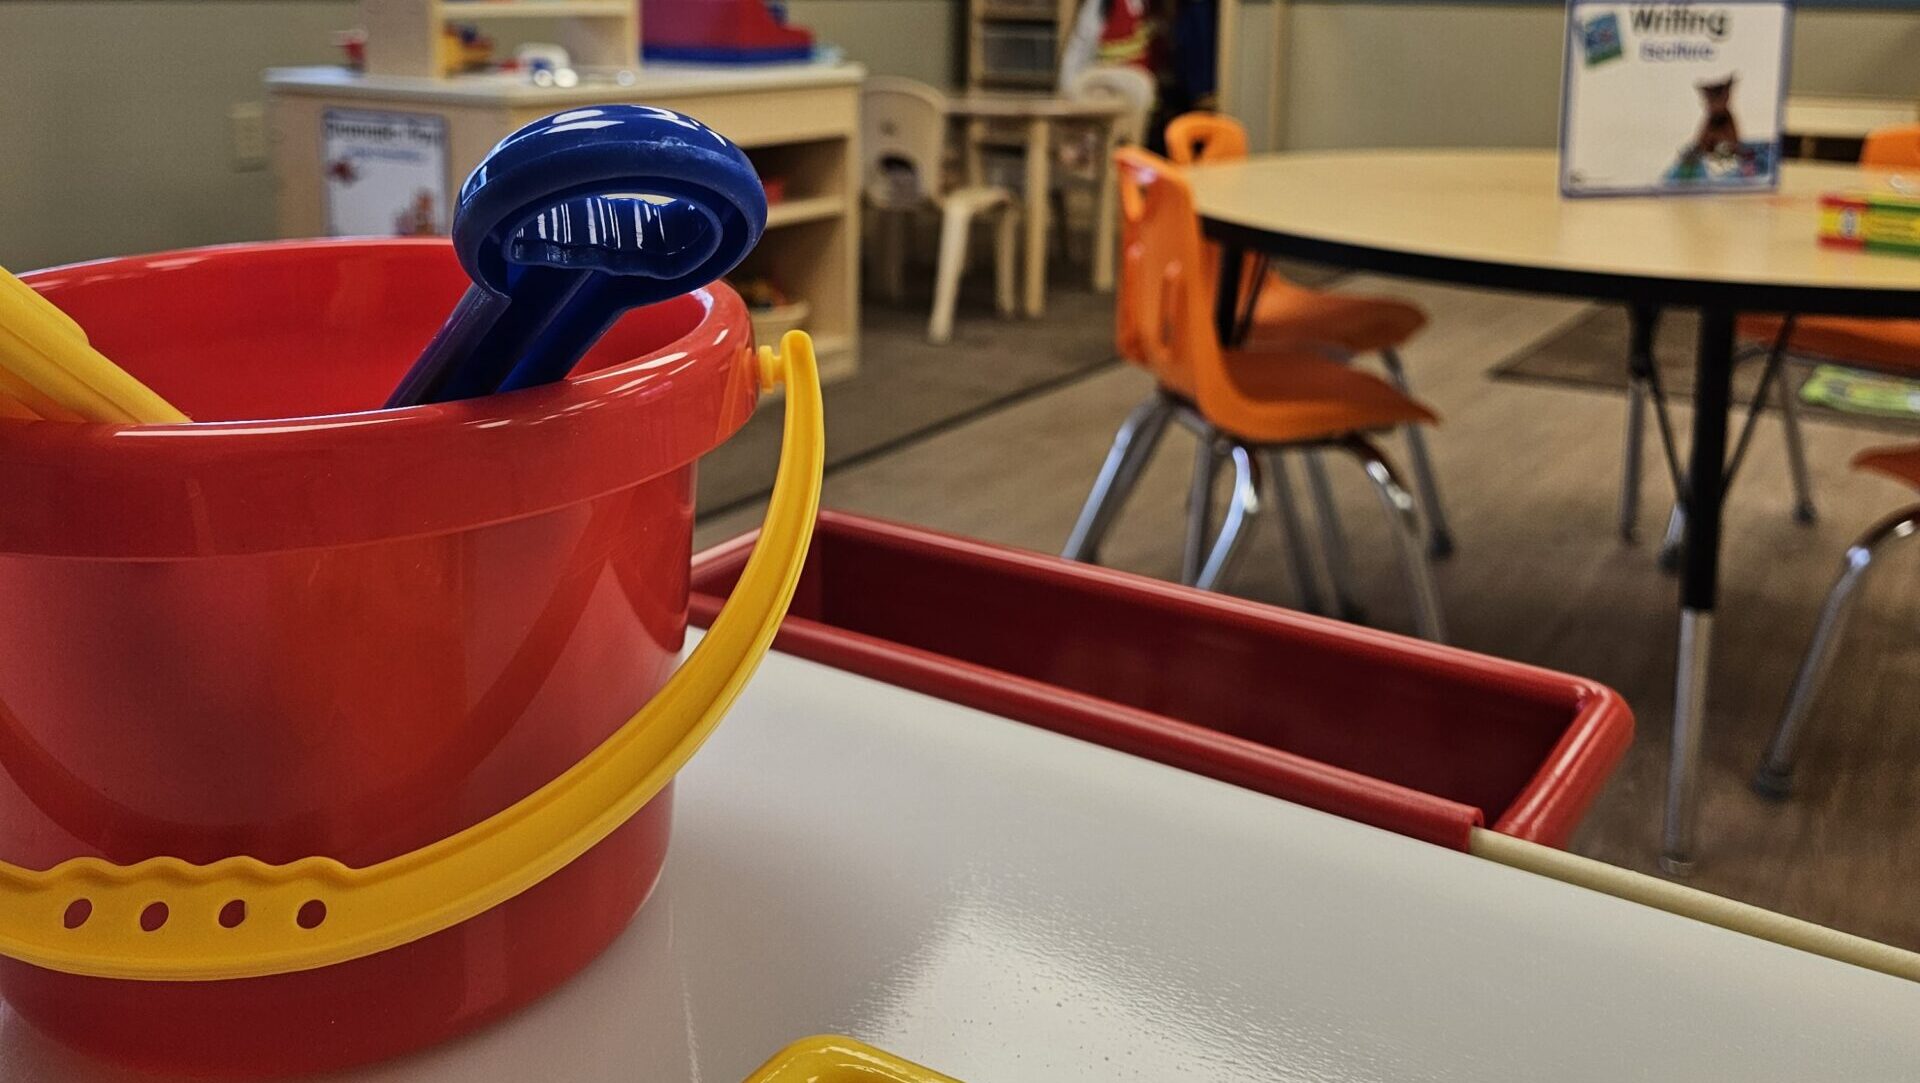 A photo of an early learning classroom with toys, tables, chairs, and books.